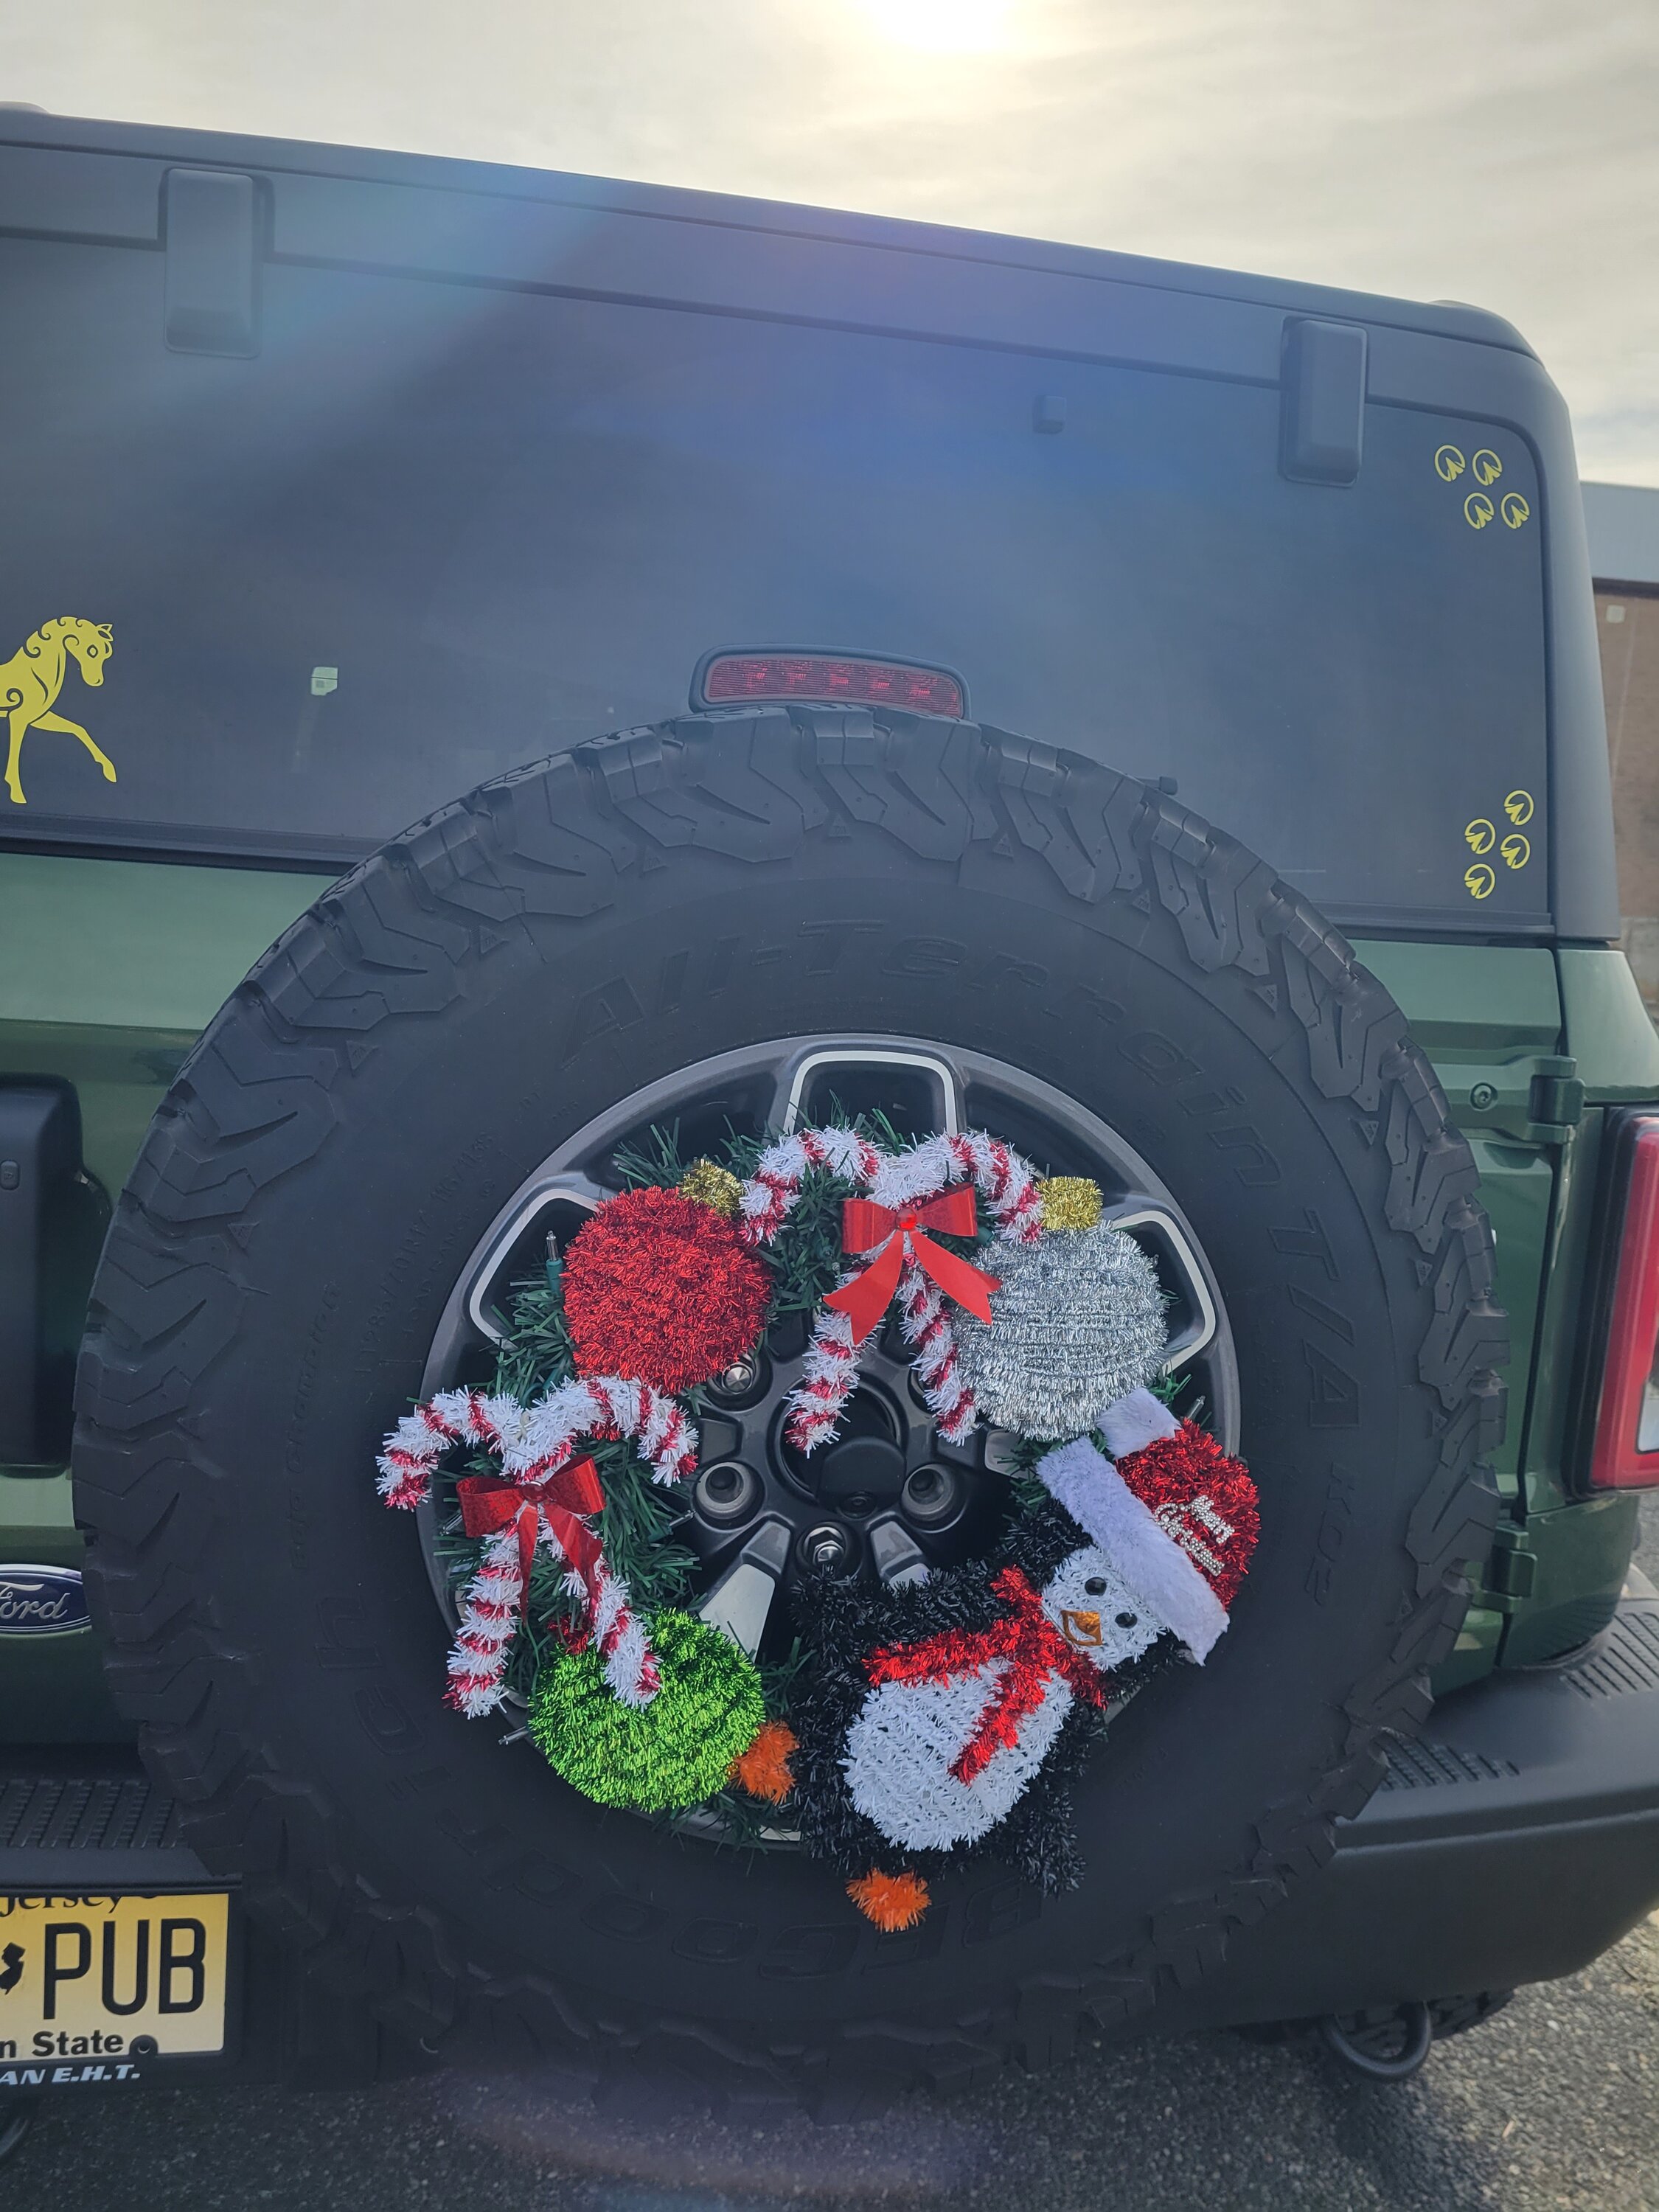 Ford Bronco How are you decorating your Bronco for Christmas or holidays? Post yours! 🎅 Christmas back